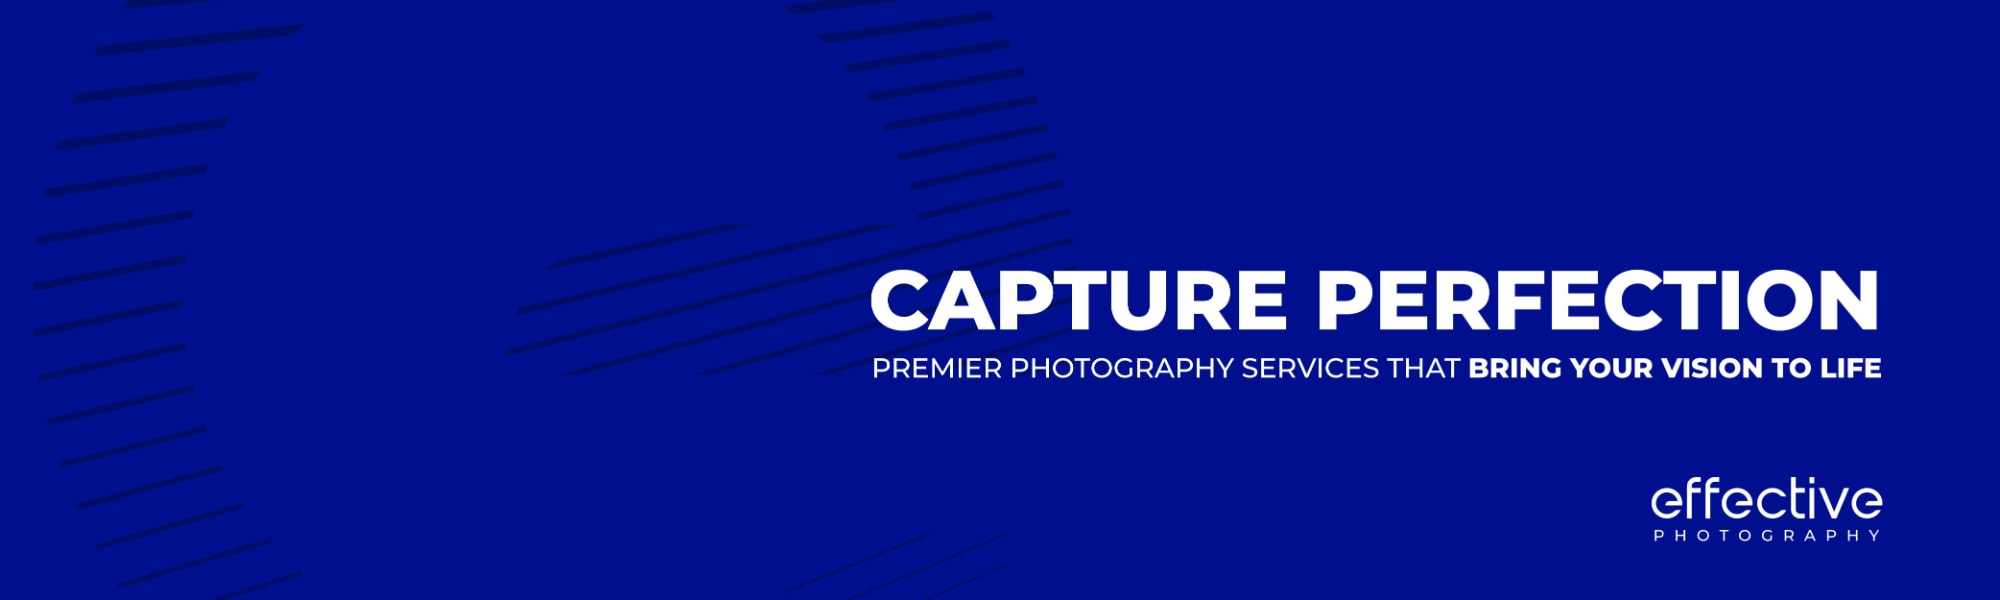 Capture Perfection Premier Photography Services That Bring Your Vision to Life